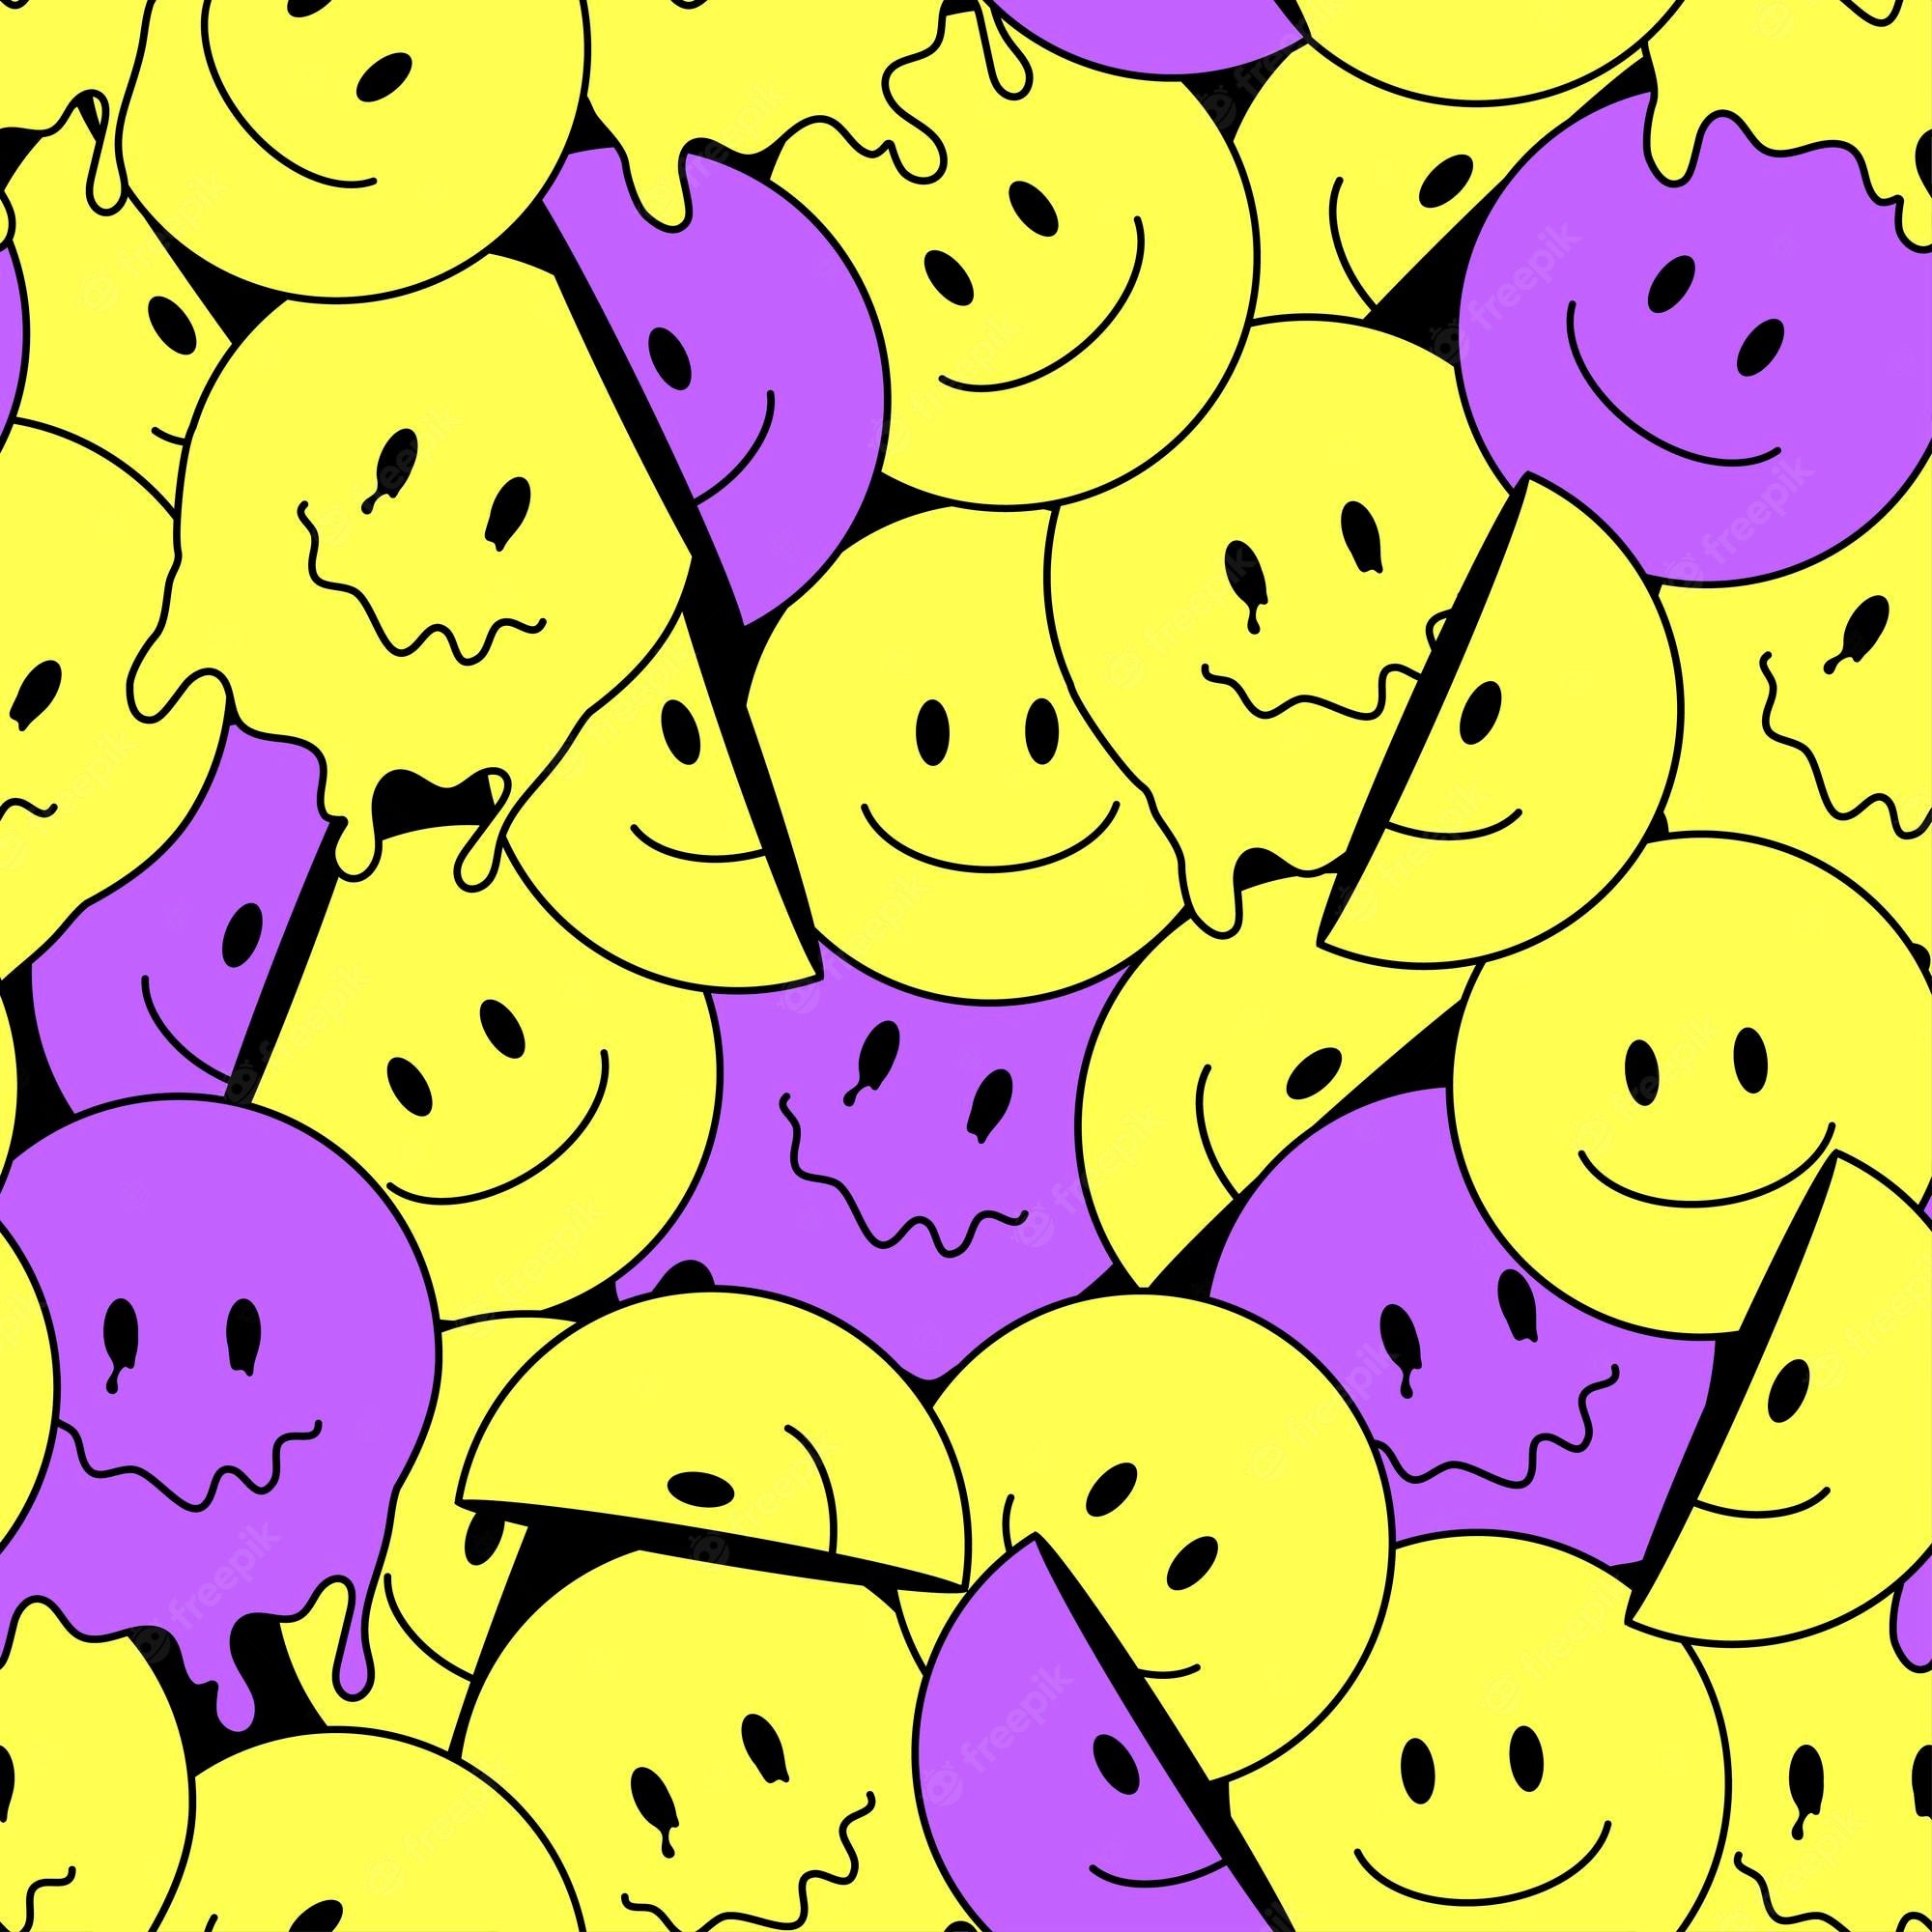  Psychedelisch Hintergrundbild 2000x2000. Premium Vector. Funny smile crazy melted face seamless pattern art vector illustration psychedelic retrro graphic positive good vibes smiley faces acid high melt trip wallpaper seamless pattern y2k aesthetic